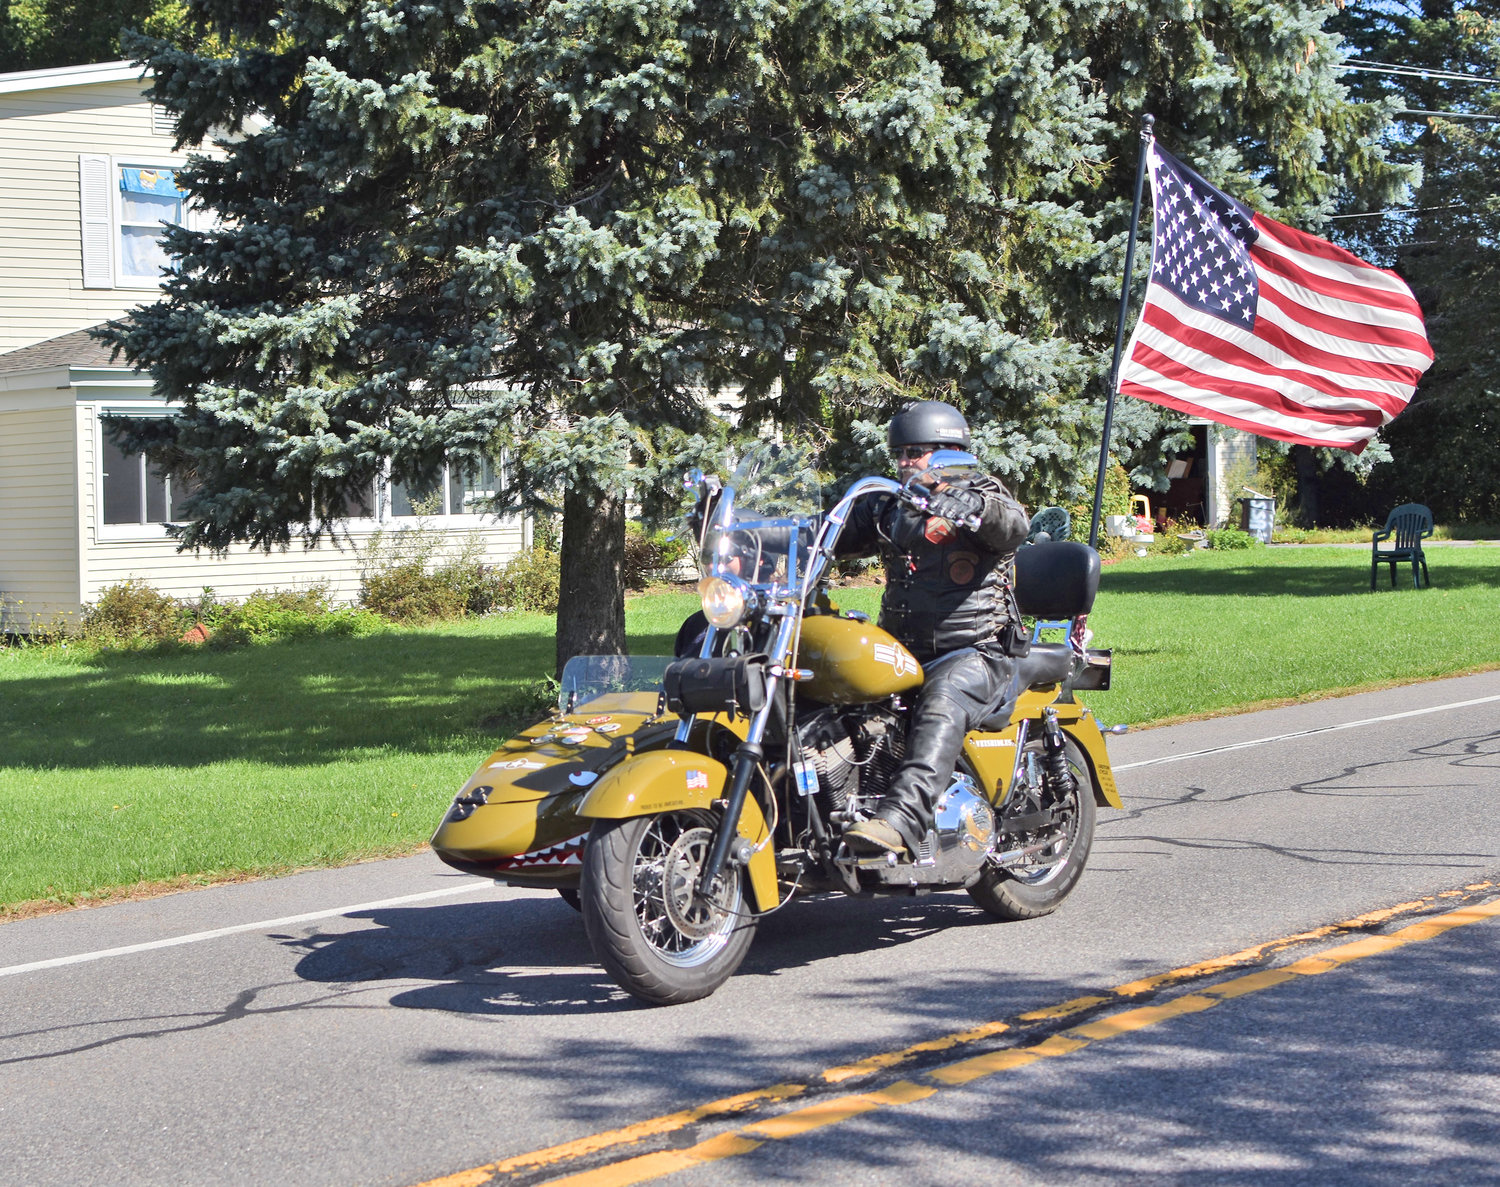 This year’s Ride for Clear Path will take place on Sunday, Sept. 25.